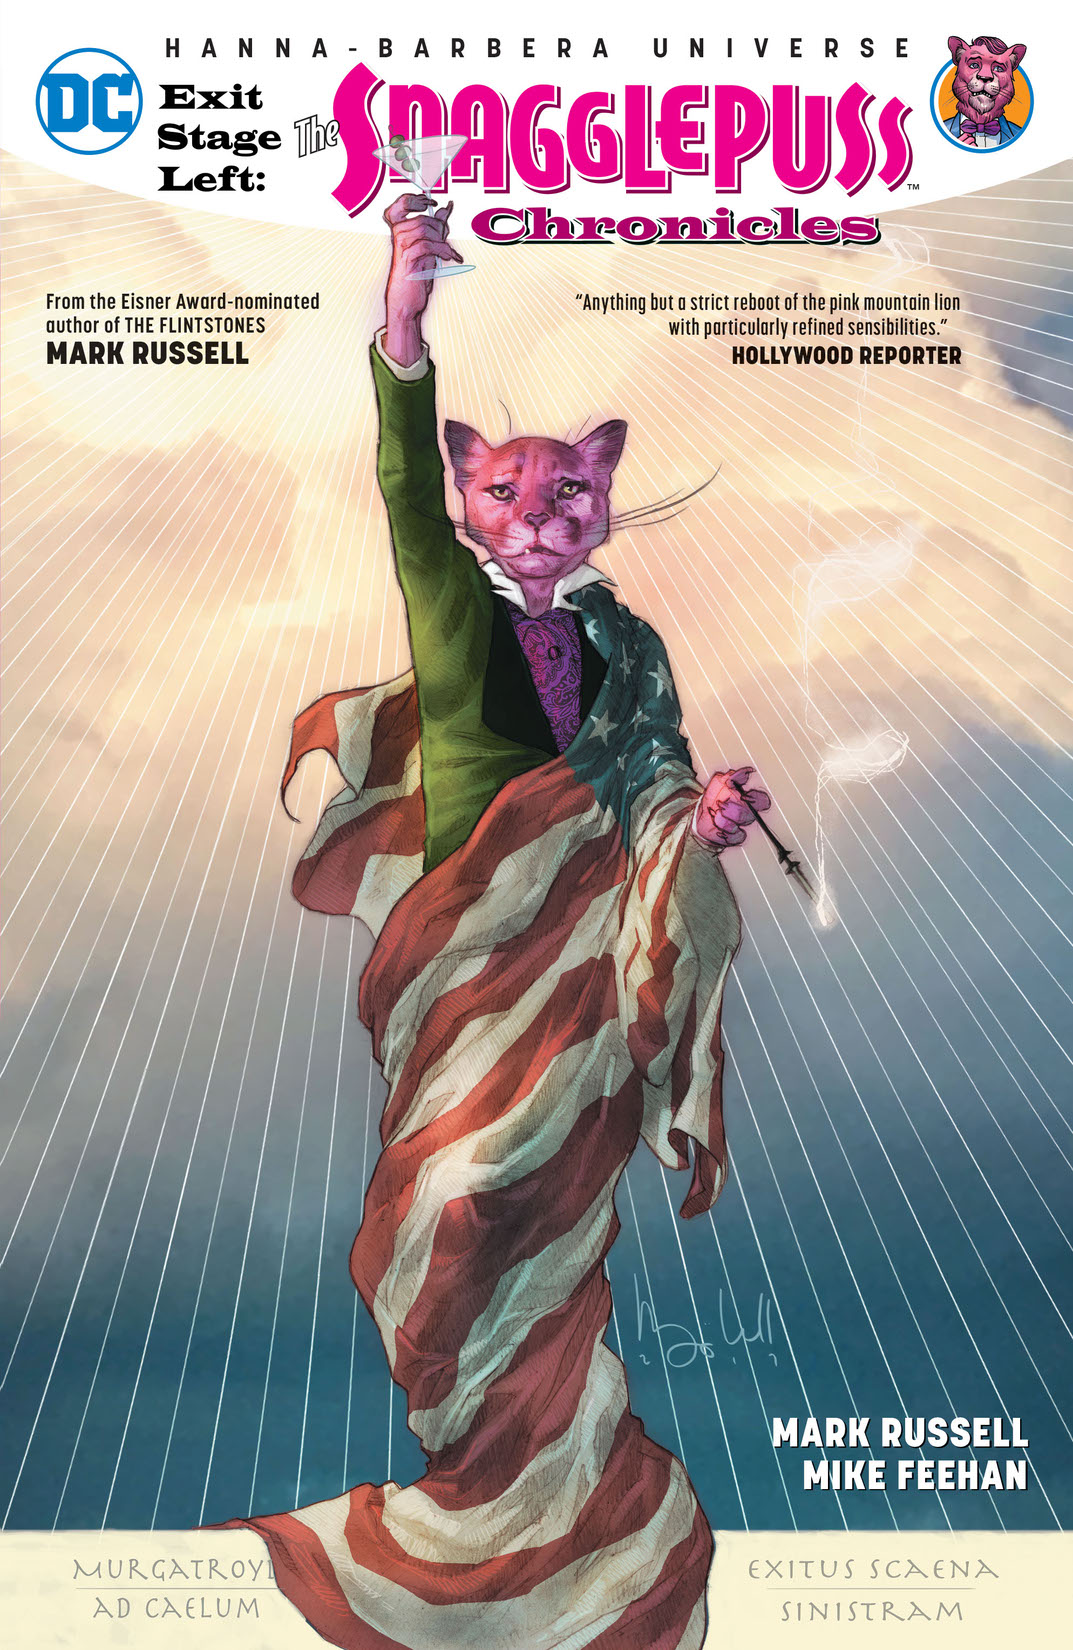 Exit Stage Left: The Snagglepuss Chronicles preview images